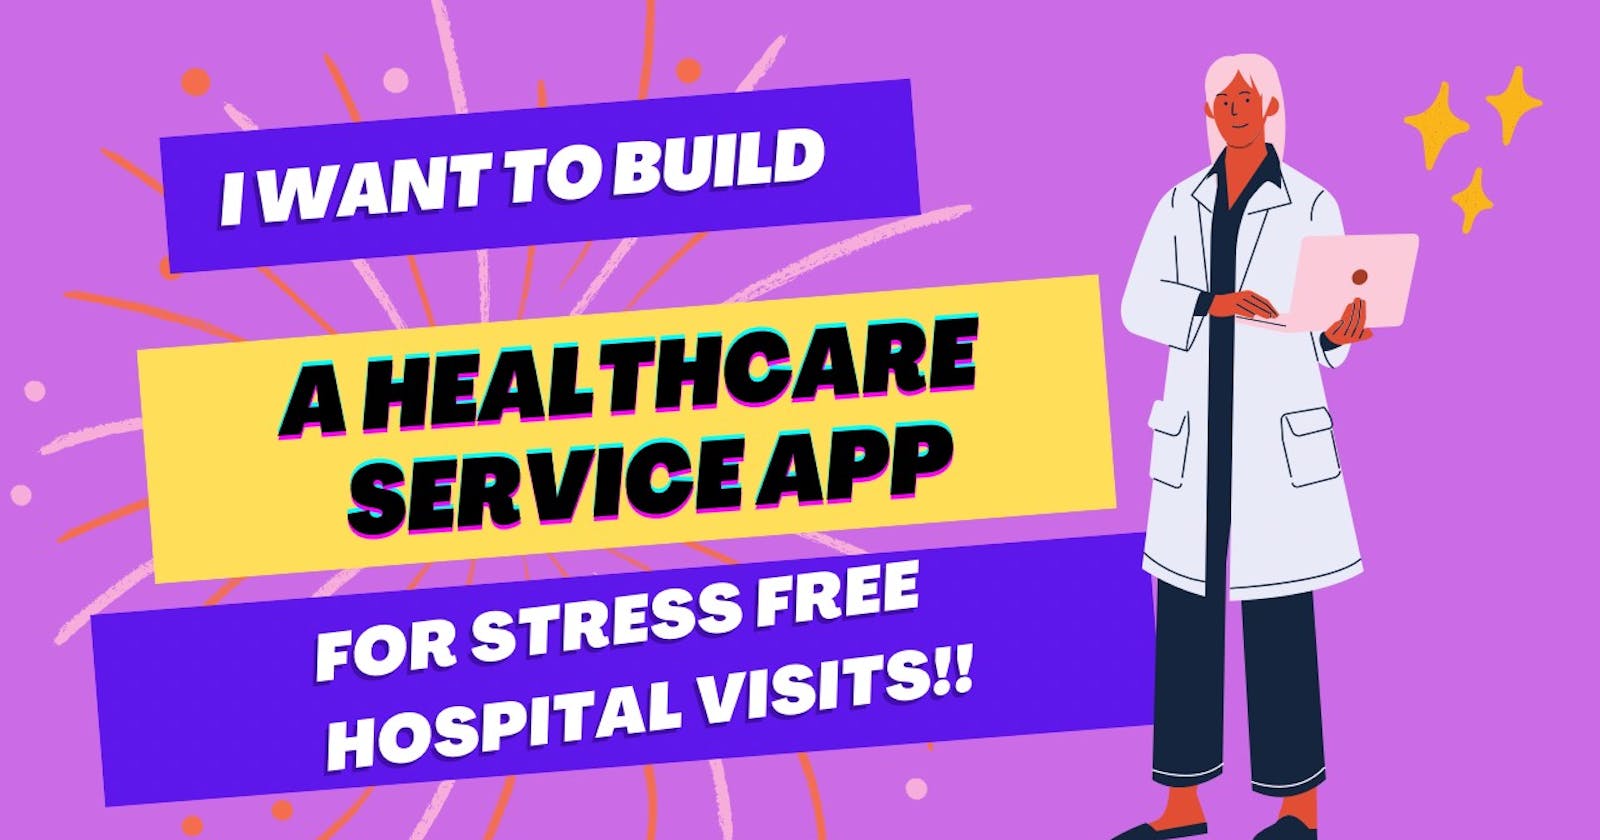 I want to build “A Healthcare Service App” for a Stress Free Hospital Visit